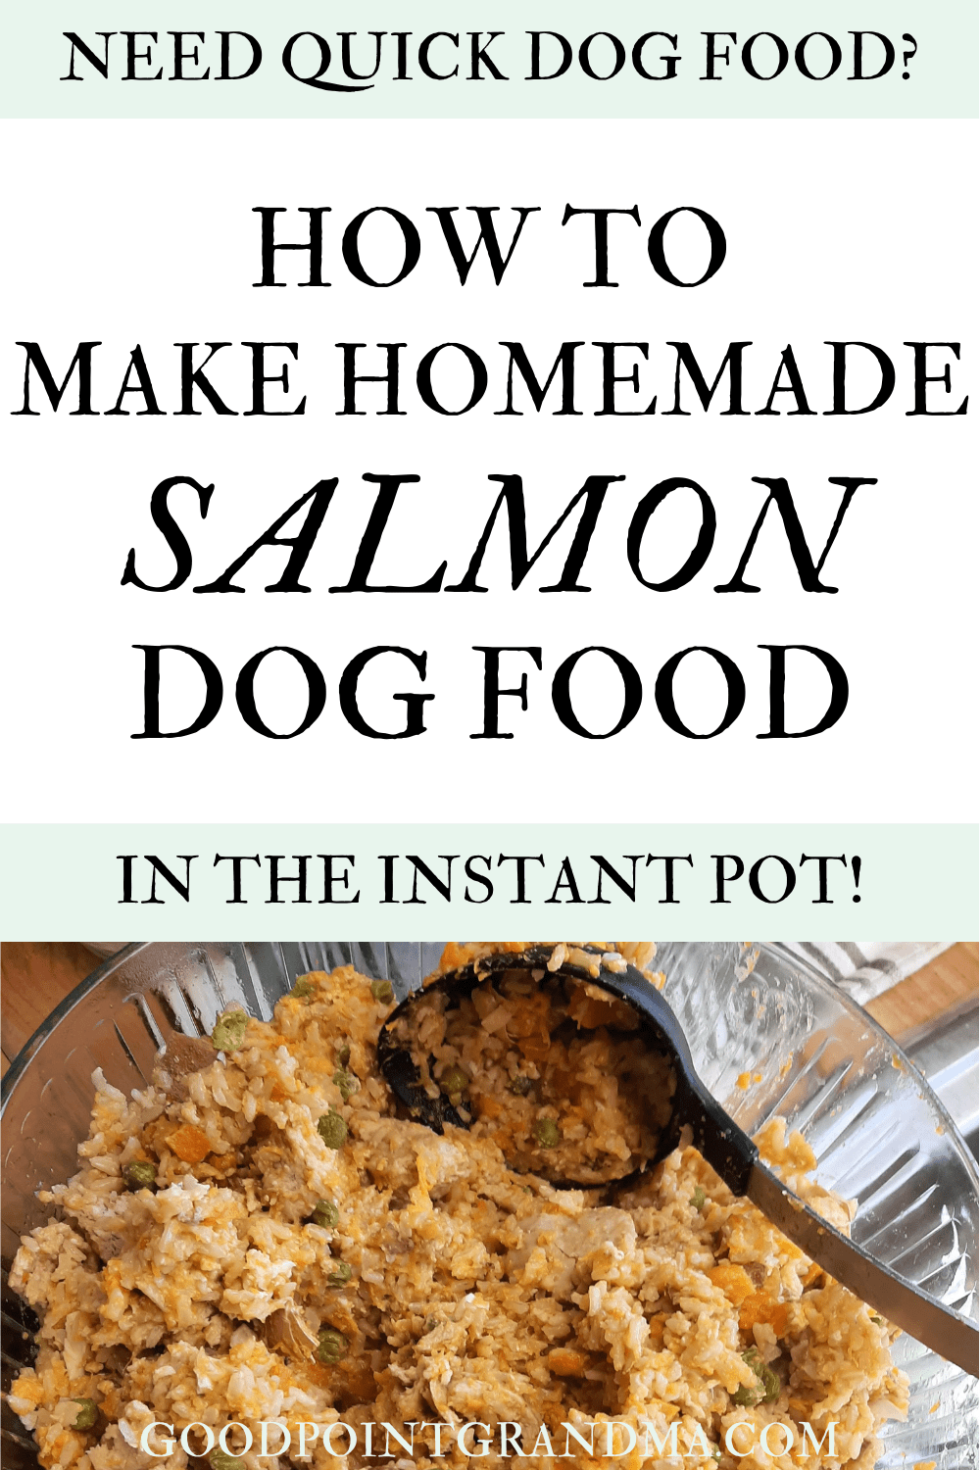 HOW-TO-MAKE-HOMEMADE-SALMON-DOG-FOOD-IN-THE-INSTANT-POT-min-980x1470.png